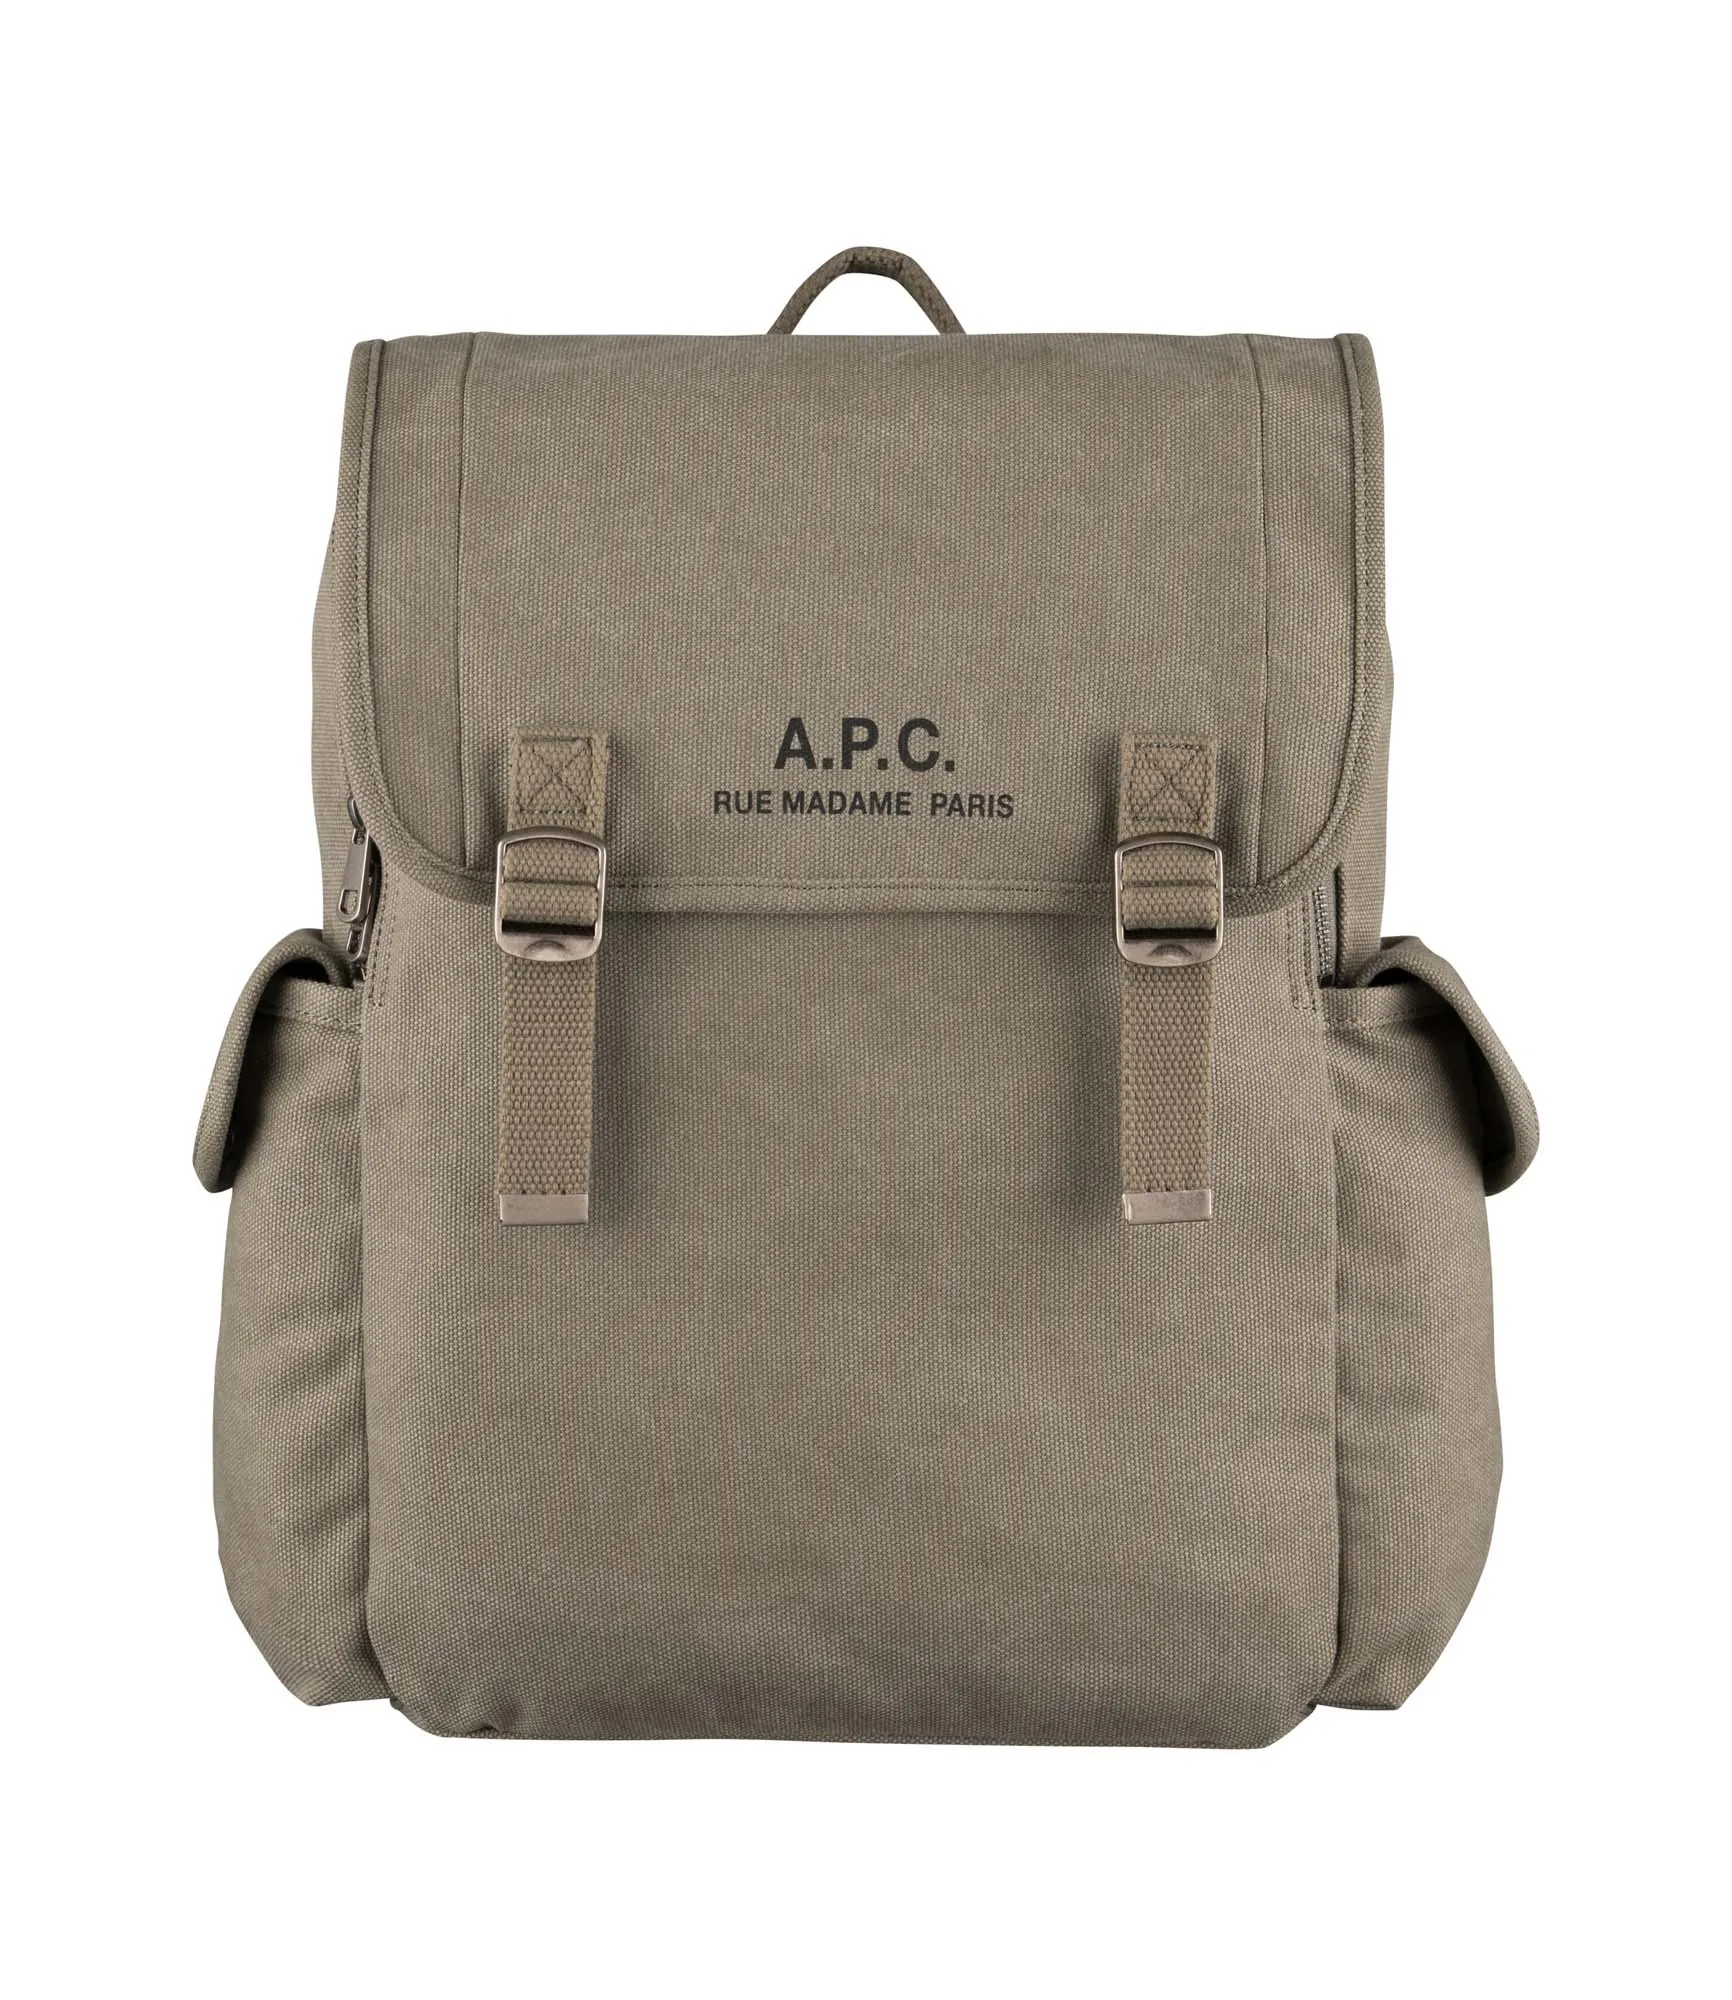 21FW 아페쎄 백팩, A.P.C. Recuperation backpack